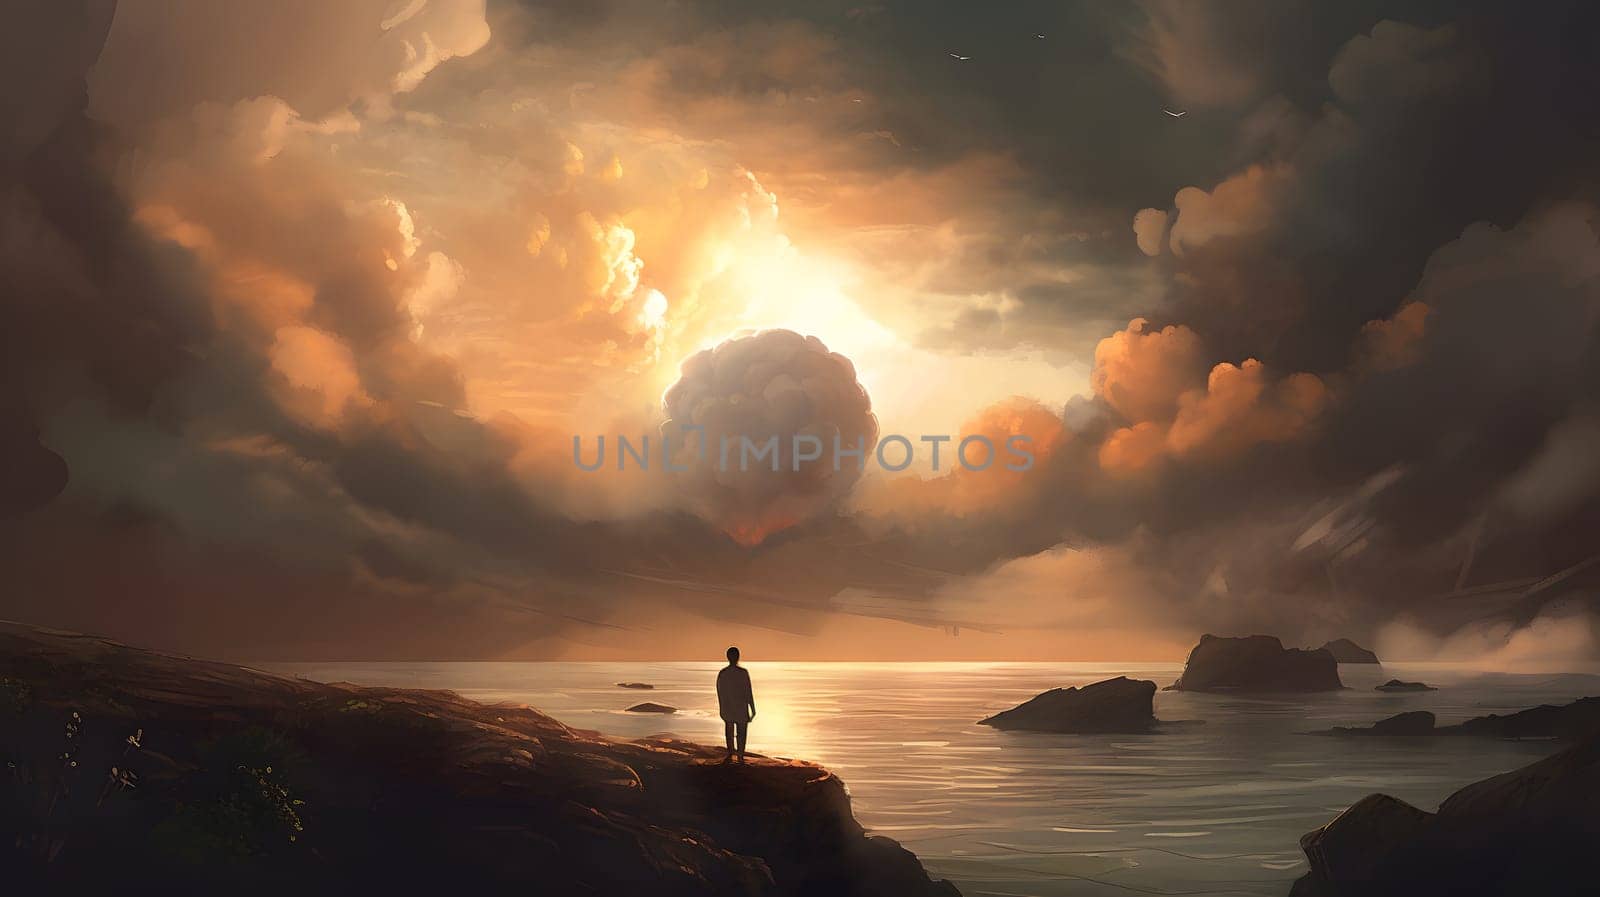 beautiful sunset in the clouds with alone human figure silhouette on sea shore in the background. Not based on any actual person, scene or pattern.